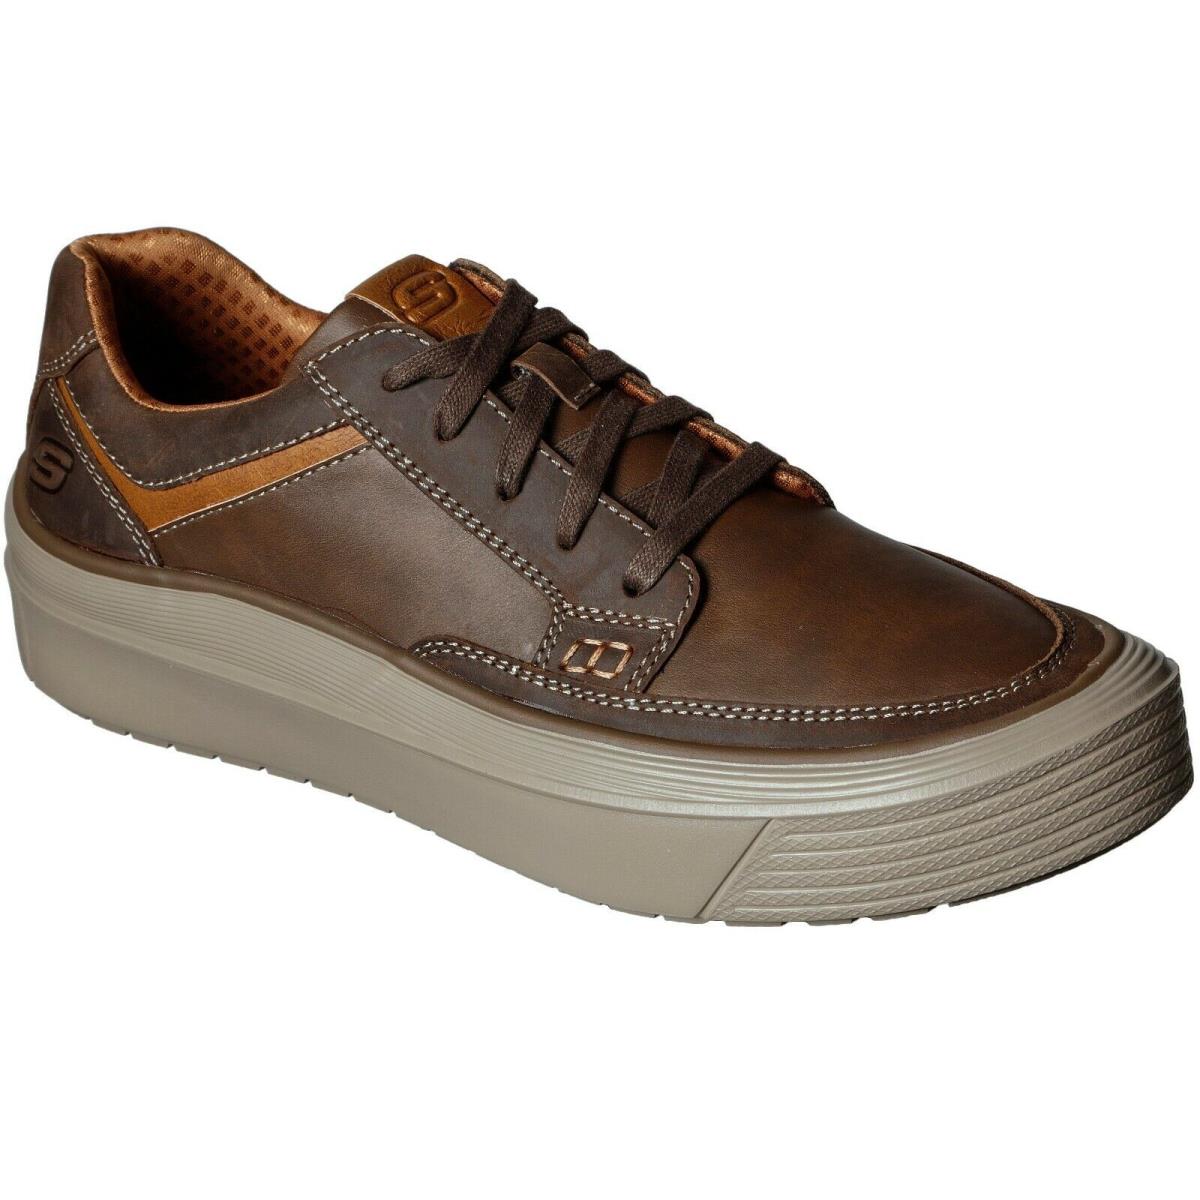 Men`s Skechers Viewport Valence Oxford Shoes 210128 /cdb Multiple Sizes Brown